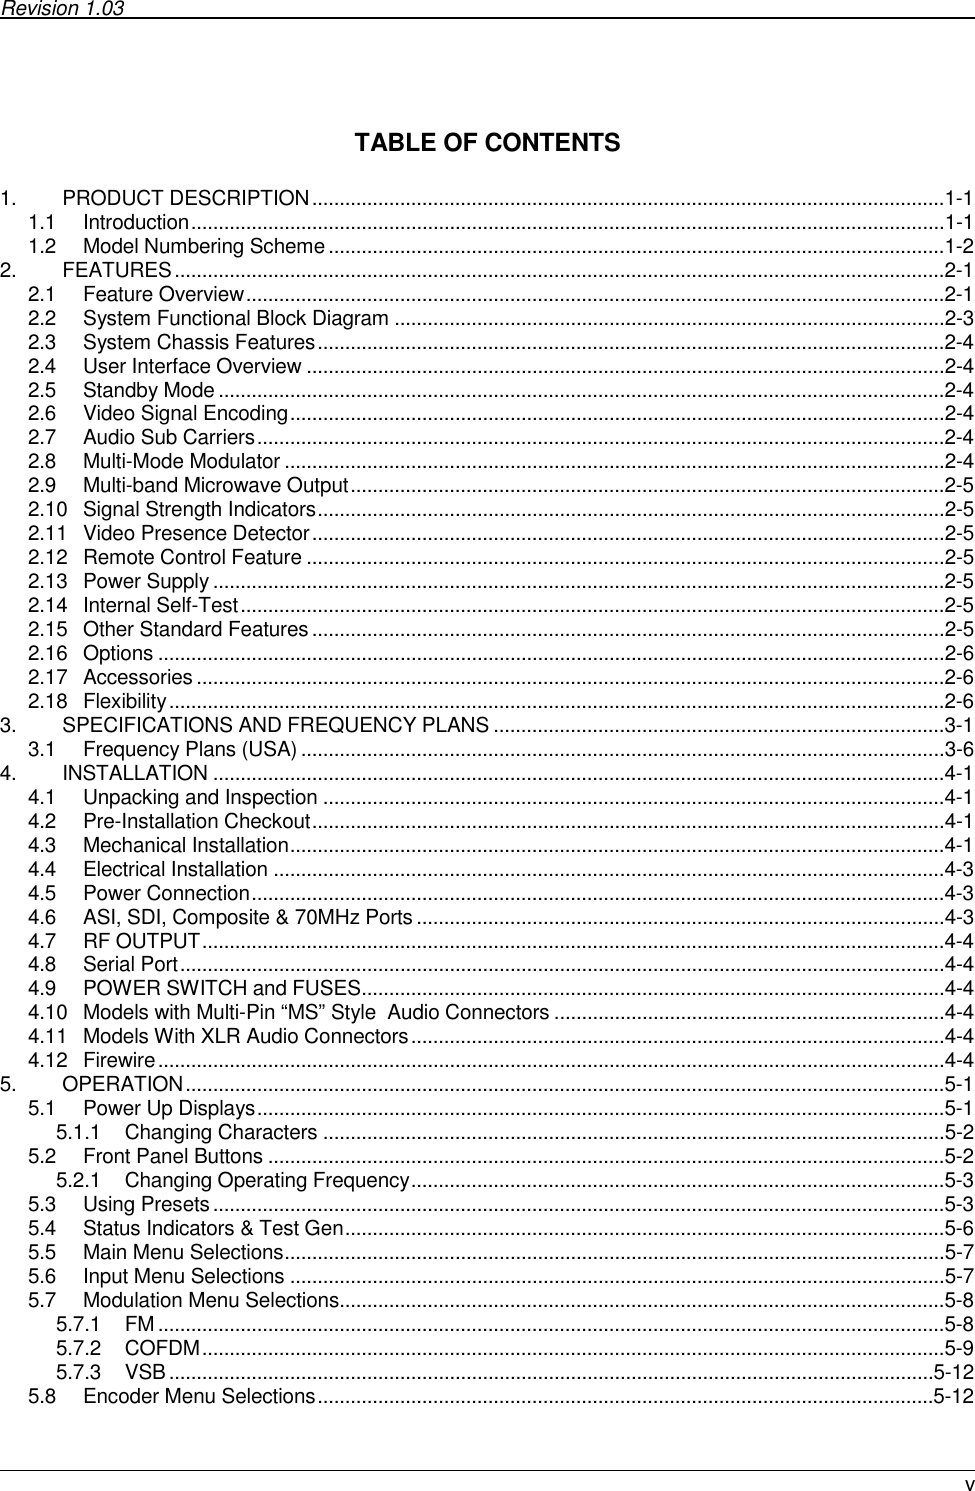 Revision 1.03       v   TABLE OF CONTENTS  1. PRODUCT DESCRIPTION...................................................................................................................1-1 1.1 Introduction.........................................................................................................................................1-1 1.2 Model Numbering Scheme................................................................................................................1-2 2. FEATURES............................................................................................................................................2-1 2.1 Feature Overview...............................................................................................................................2-1 2.2 System Functional Block Diagram ....................................................................................................2-3 2.3 System Chassis Features..................................................................................................................2-4 2.4 User Interface Overview ....................................................................................................................2-4 2.5 Standby Mode ....................................................................................................................................2-4 2.6 Video Signal Encoding.......................................................................................................................2-4 2.7 Audio Sub Carriers.............................................................................................................................2-4 2.8 Multi-Mode Modulator ........................................................................................................................2-4 2.9 Multi-band Microwave Output............................................................................................................2-5 2.10 Signal Strength Indicators..................................................................................................................2-5 2.11 Video Presence Detector...................................................................................................................2-5 2.12 Remote Control Feature ....................................................................................................................2-5 2.13 Power Supply .....................................................................................................................................2-5 2.14 Internal Self-Test................................................................................................................................2-5 2.15 Other Standard Features...................................................................................................................2-5 2.16 Options ...............................................................................................................................................2-6 2.17 Accessories ........................................................................................................................................2-6 2.18 Flexibility.............................................................................................................................................2-6 3. SPECIFICATIONS AND FREQUENCY PLANS ..................................................................................3-1 3.1 Frequency Plans (USA) .....................................................................................................................3-6 4. INSTALLATION .....................................................................................................................................4-1 4.1 Unpacking and Inspection .................................................................................................................4-1 4.2 Pre-Installation Checkout...................................................................................................................4-1 4.3 Mechanical Installation.......................................................................................................................4-1 4.4 Electrical Installation ..........................................................................................................................4-3 4.5 Power Connection..............................................................................................................................4-3 4.6 ASI, SDI, Composite &amp; 70MHz Ports................................................................................................4-3 4.7 RF OUTPUT.......................................................................................................................................4-4 4.8 Serial Port...........................................................................................................................................4-4 4.9 POWER SWITCH and FUSES..........................................................................................................4-4 4.10 Models with Multi-Pin “MS” Style  Audio Connectors .......................................................................4-4 4.11 Models With XLR Audio Connectors.................................................................................................4-4 4.12 Firewire...............................................................................................................................................4-4 5. OPERATION..........................................................................................................................................5-1 5.1 Power Up Displays.............................................................................................................................5-1 5.1.1 Changing Characters .................................................................................................................5-2 5.2 Front Panel Buttons ...........................................................................................................................5-2 5.2.1 Changing Operating Frequency.................................................................................................5-3 5.3 Using Presets.....................................................................................................................................5-3 5.4 Status Indicators &amp; Test Gen.............................................................................................................5-6 5.5 Main Menu Selections........................................................................................................................5-7 5.6 Input Menu Selections .......................................................................................................................5-7 5.7 Modulation Menu Selections..............................................................................................................5-8 5.7.1 FM ...............................................................................................................................................5-8 5.7.2 COFDM.......................................................................................................................................5-9 5.7.3 VSB...........................................................................................................................................5-12 5.8 Encoder Menu Selections................................................................................................................5-12 